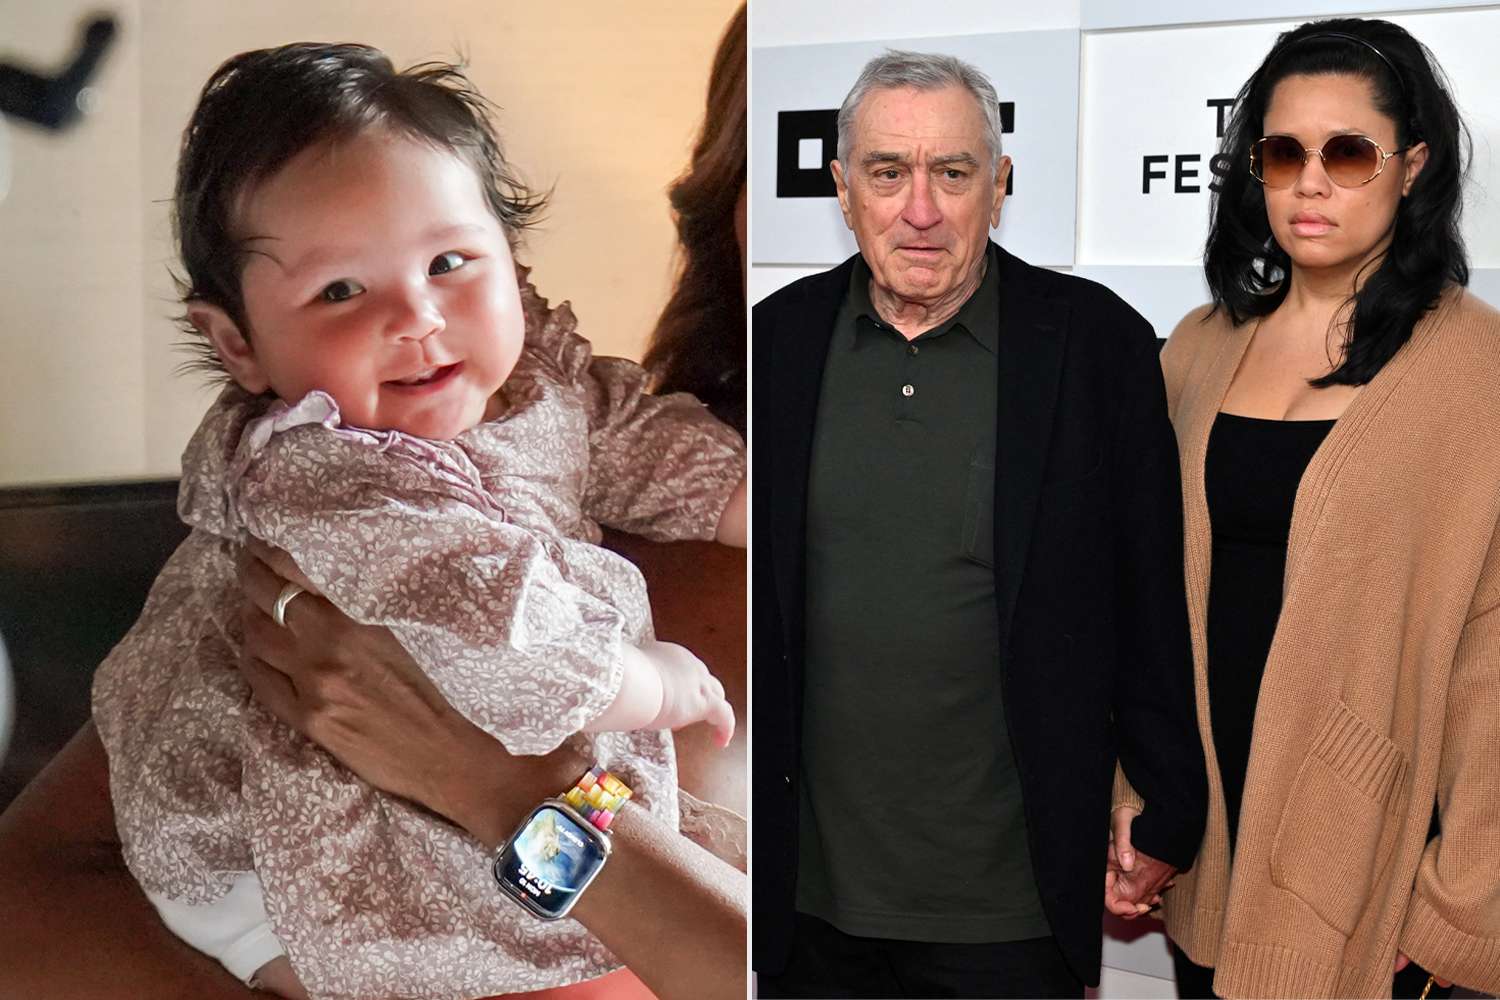 Robert De Niro Opens Up About Daughter Gia's 'Sweet' First Birthday: 'Just Pure Joy'